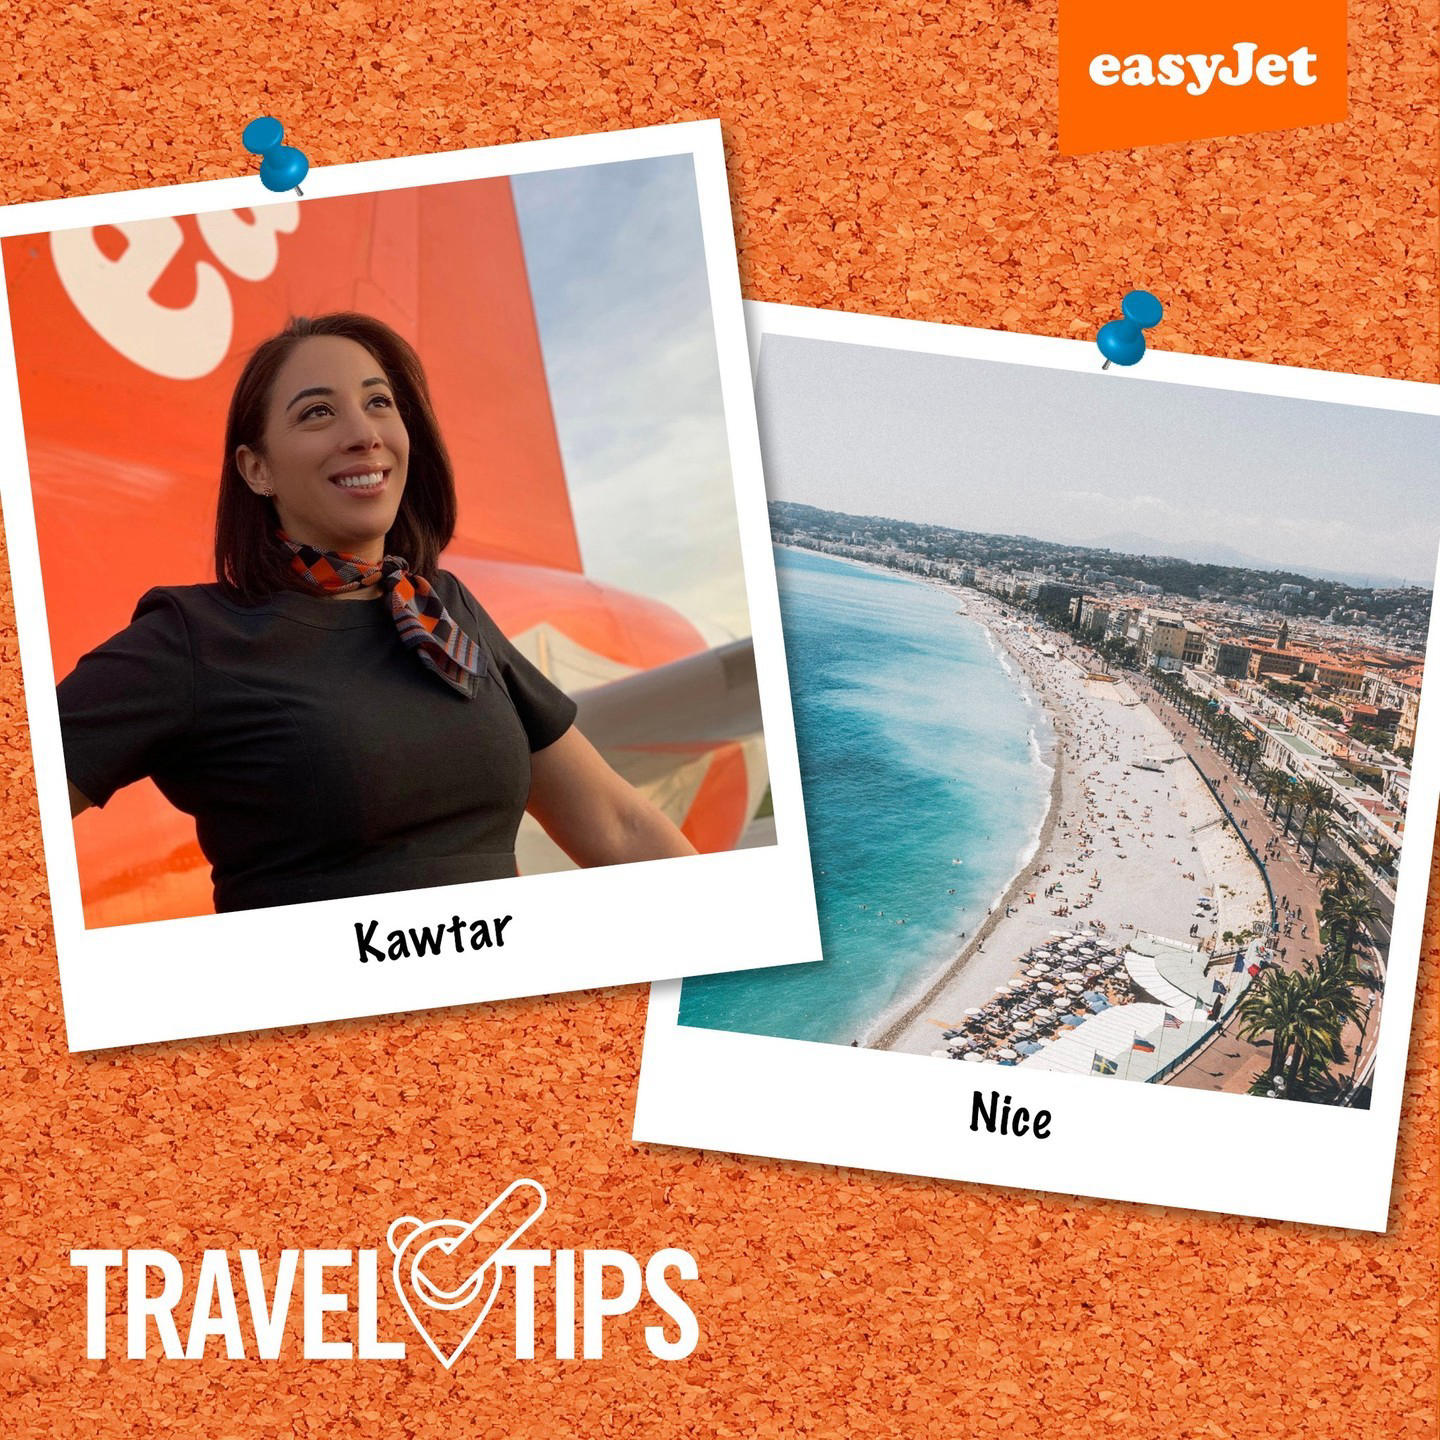 easyJet - “Nice is a beautiful city and there are many places for sightseeing along the famous ‘Prom